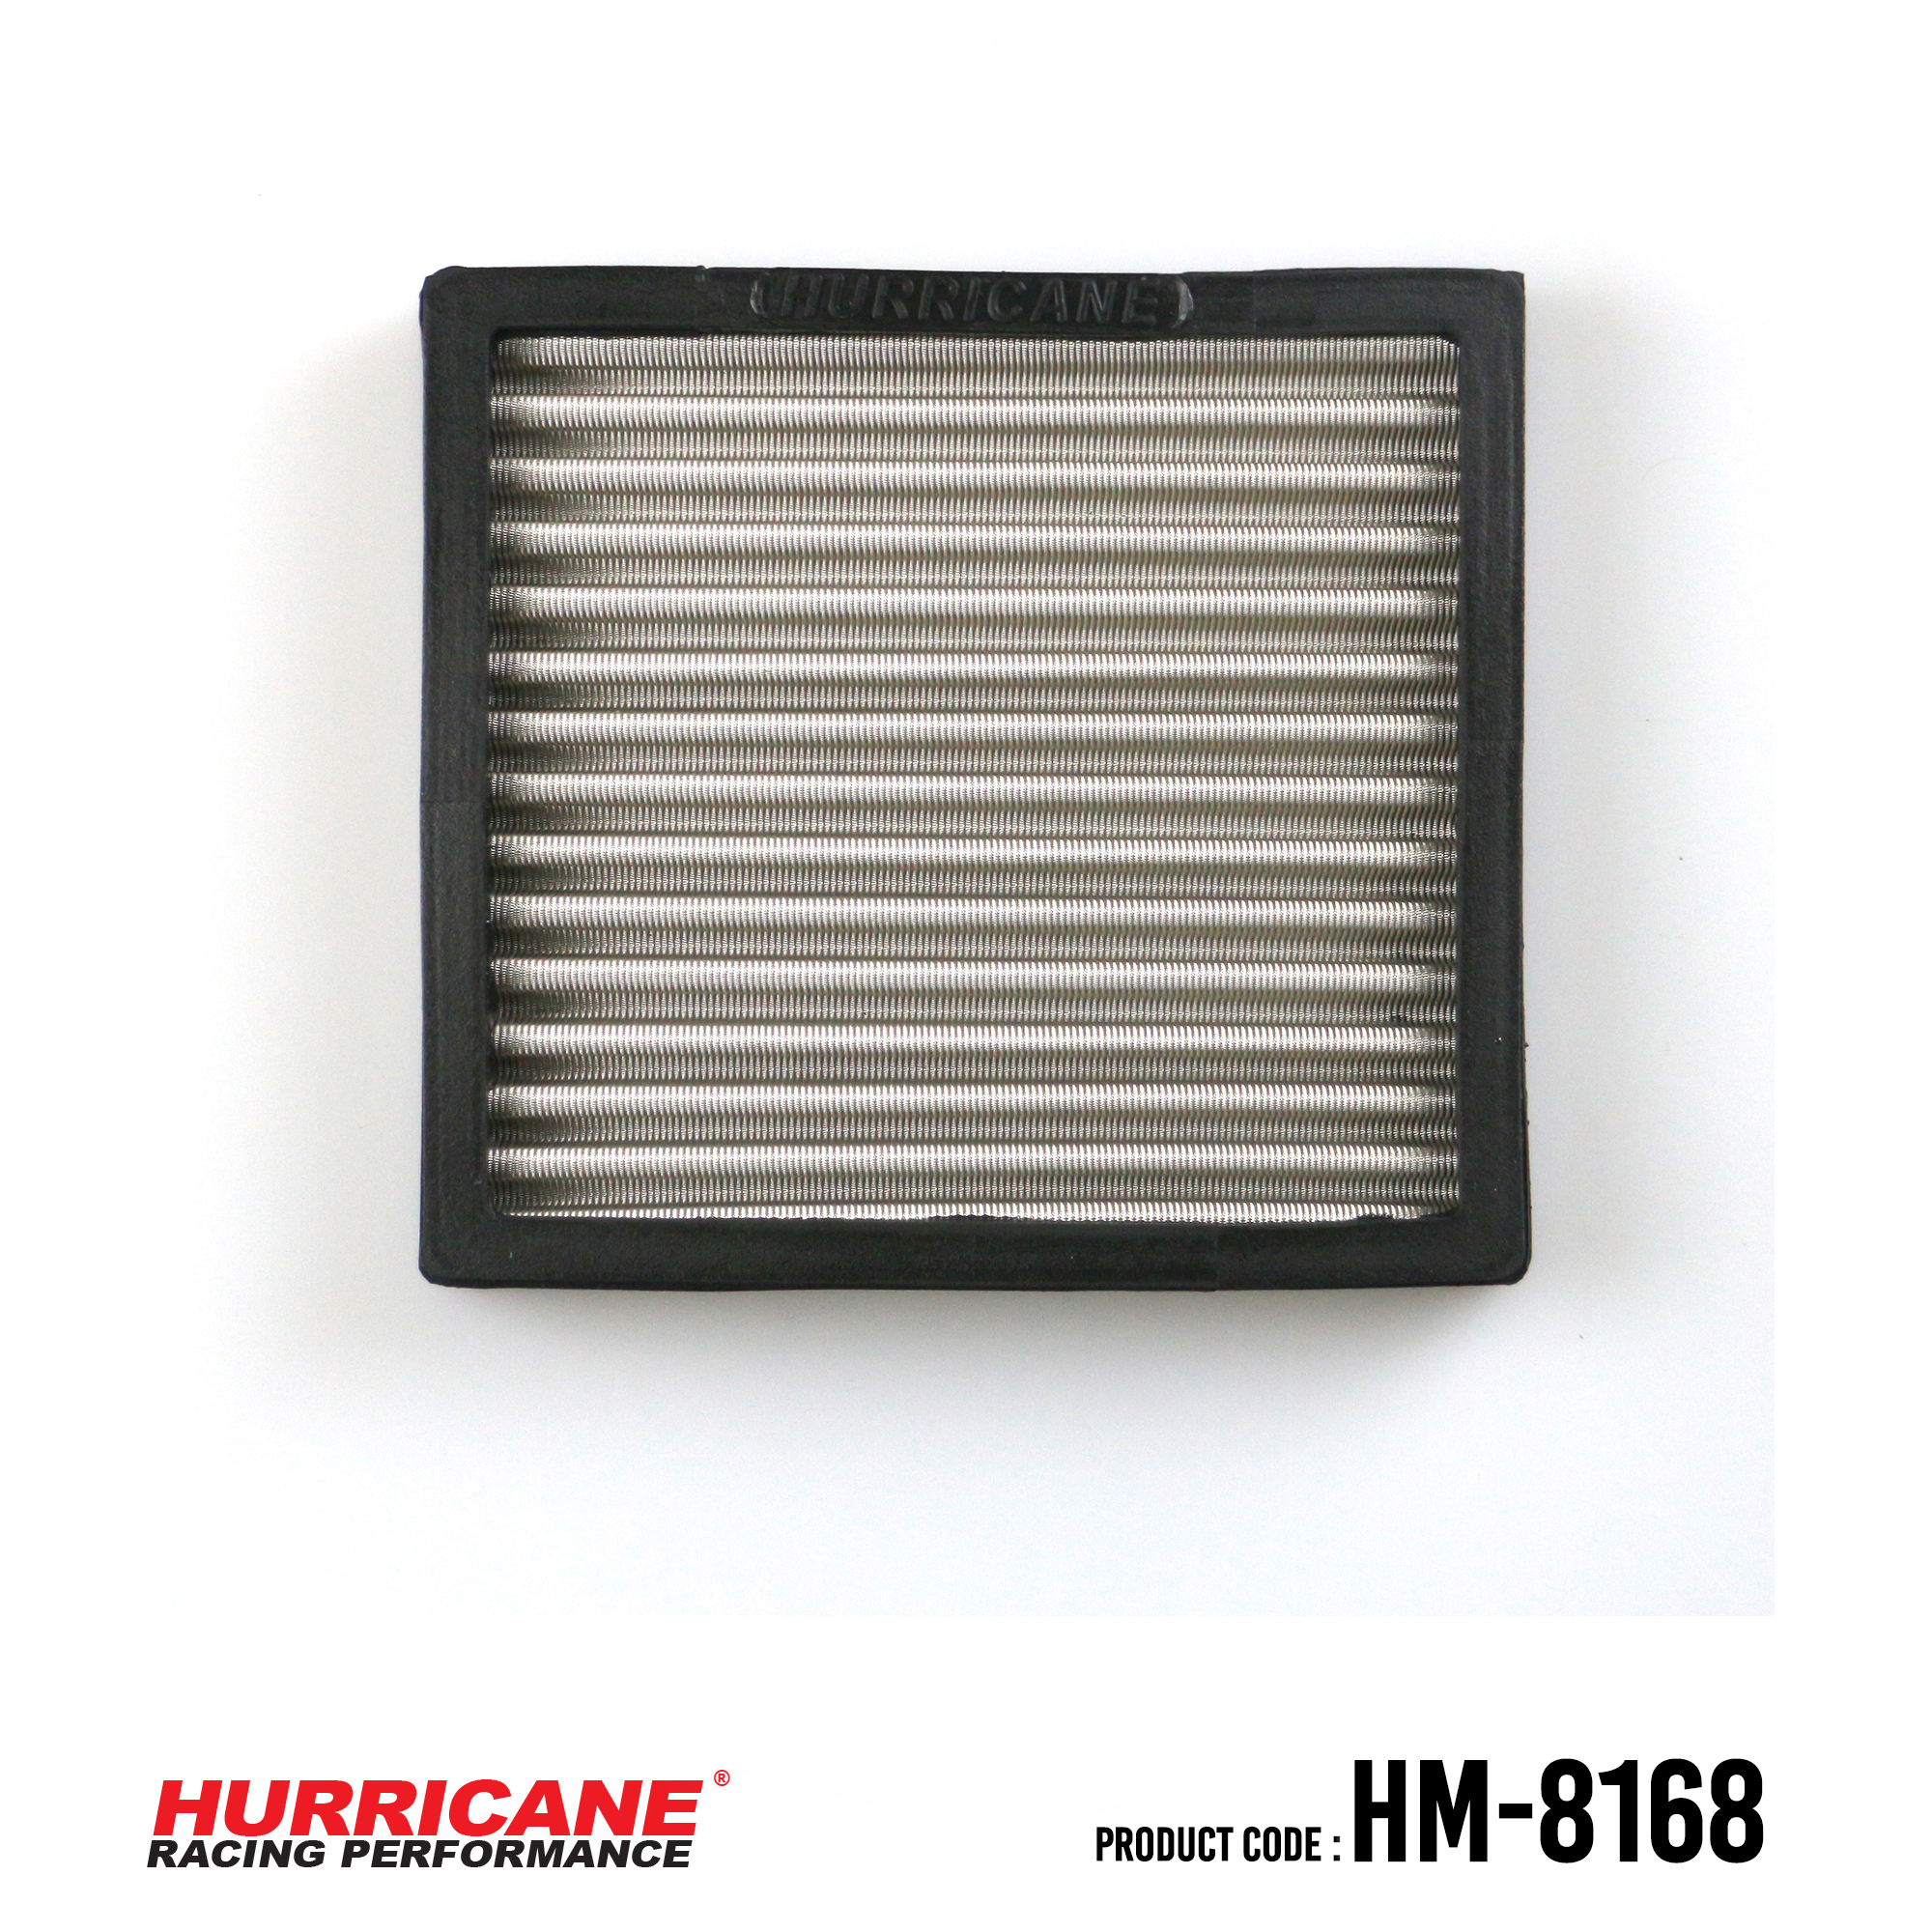 HURRICANE STAINLESS STEEL AIR FILTER FOR HM-8168 GPX